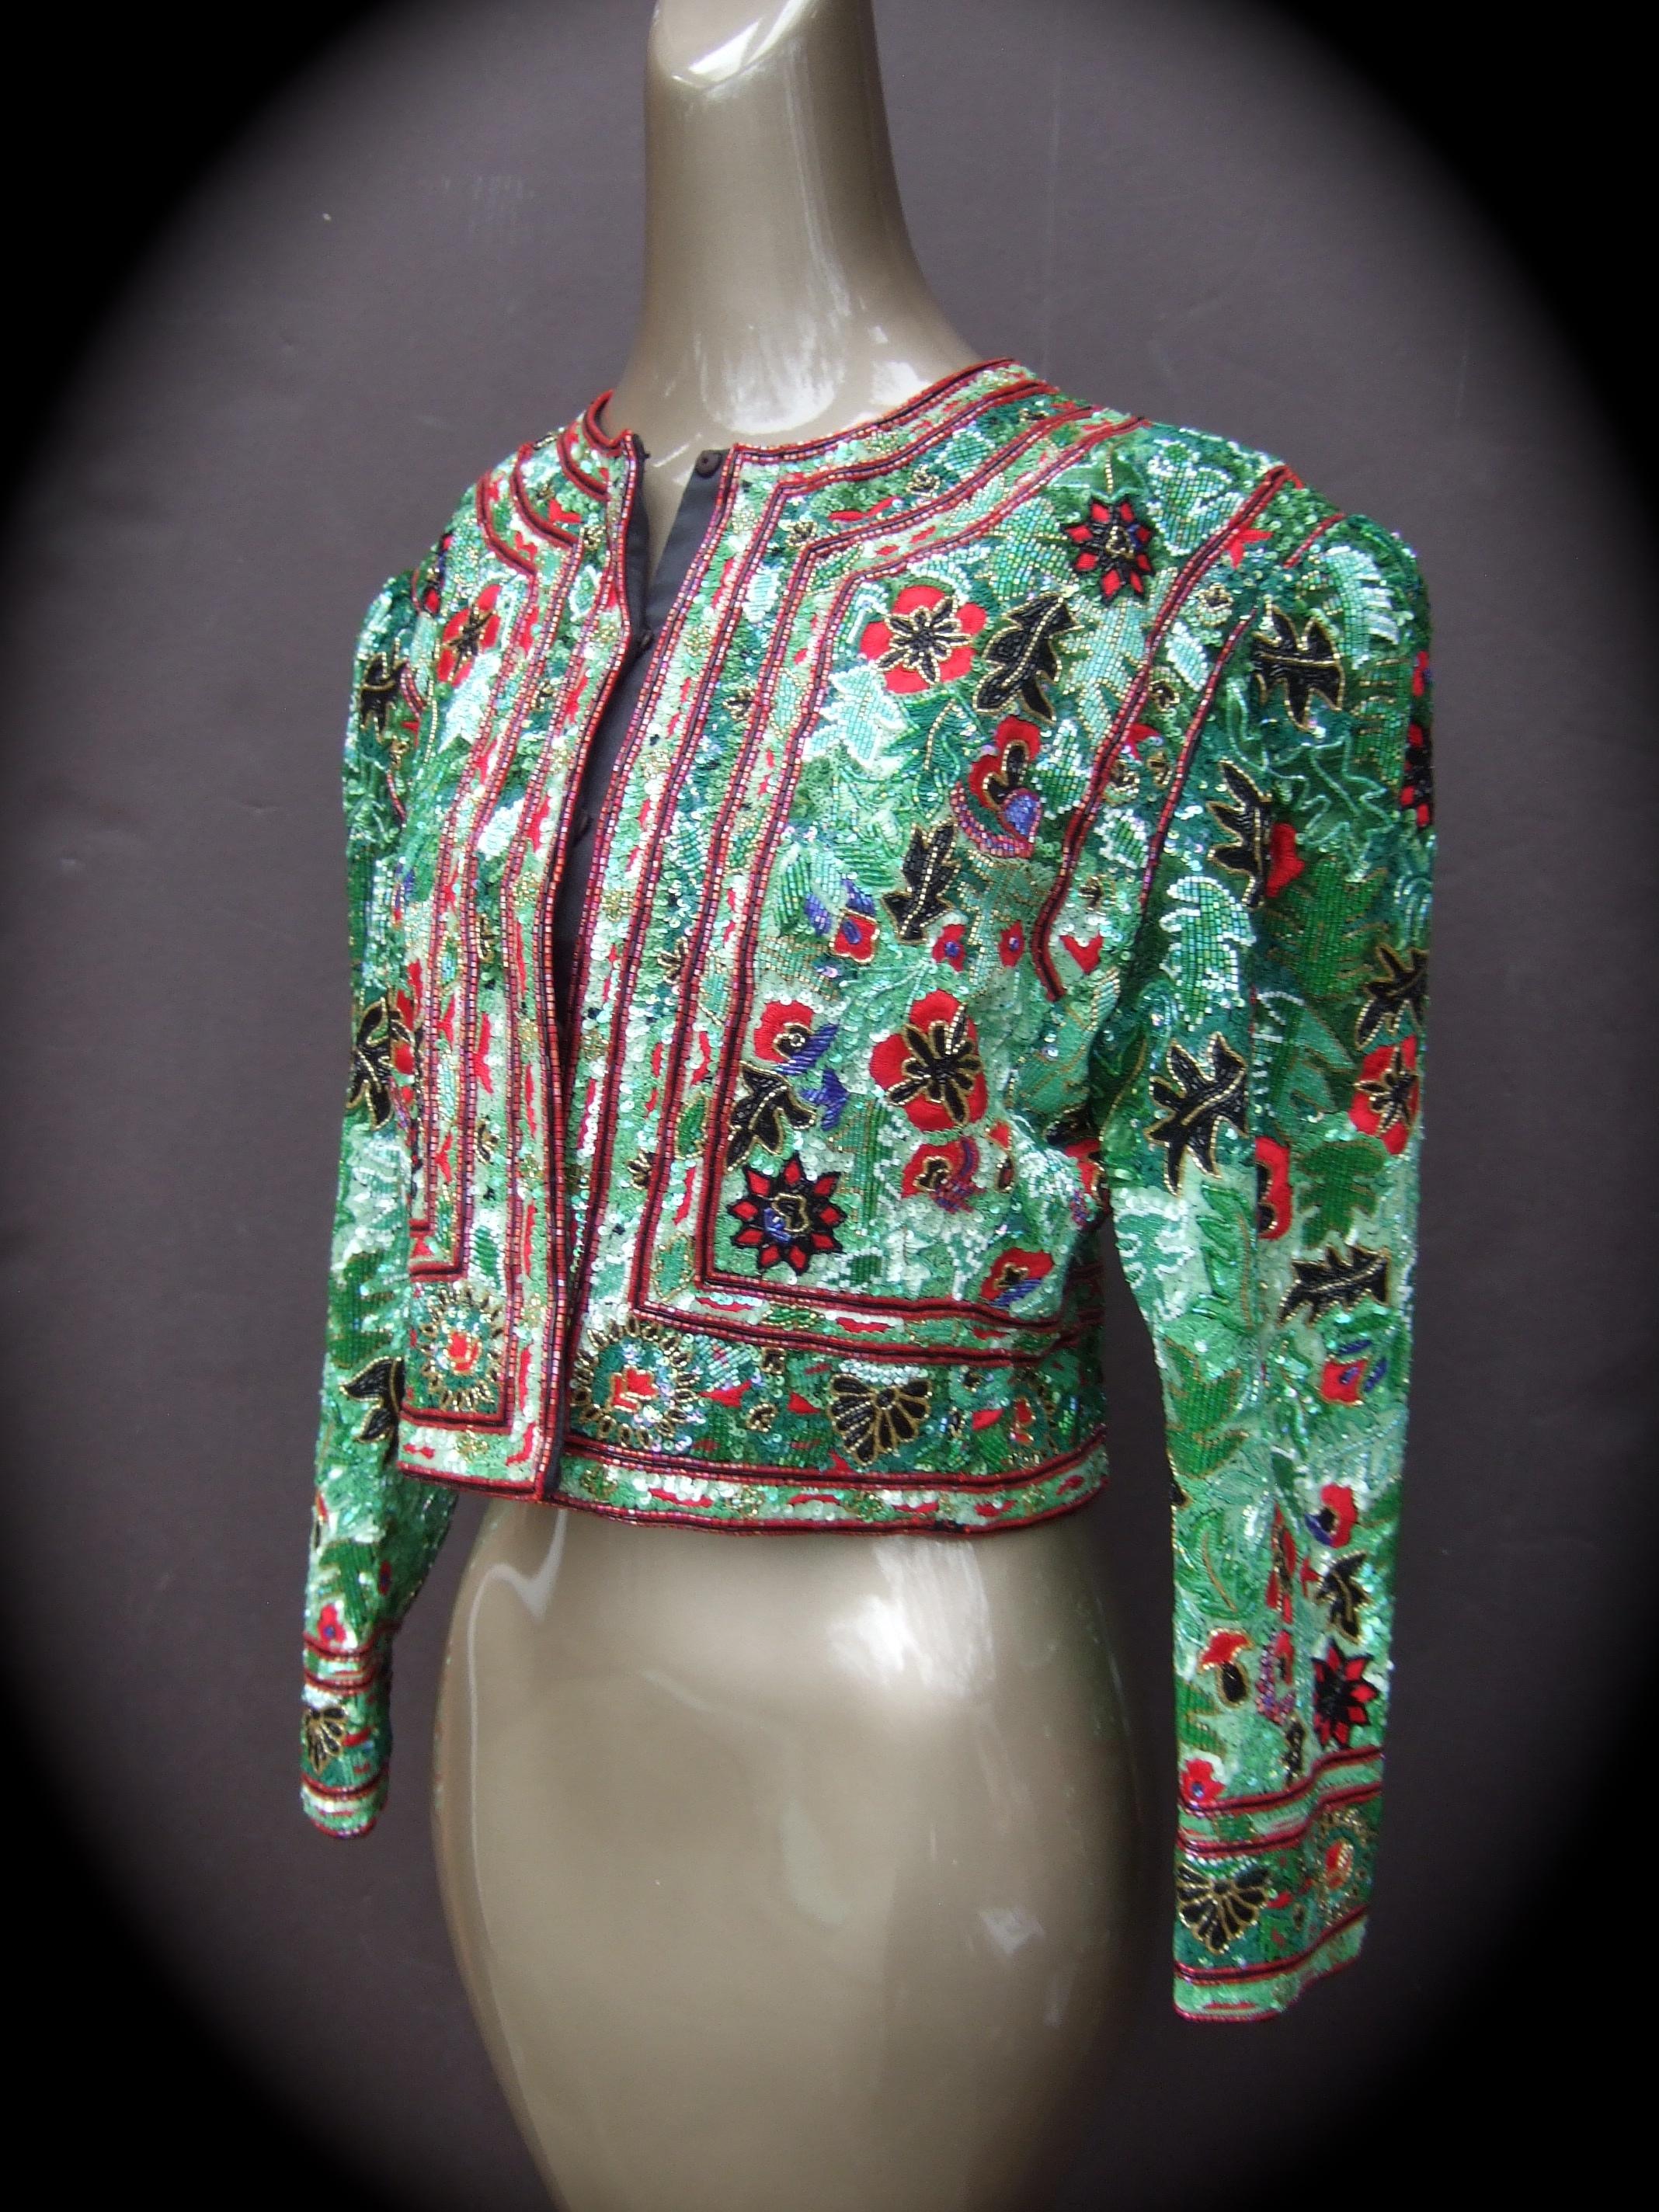 Exquisite Elaborate Glass Floral Beaded Embroidered Bolero Jacket c 1980s For Sale 1